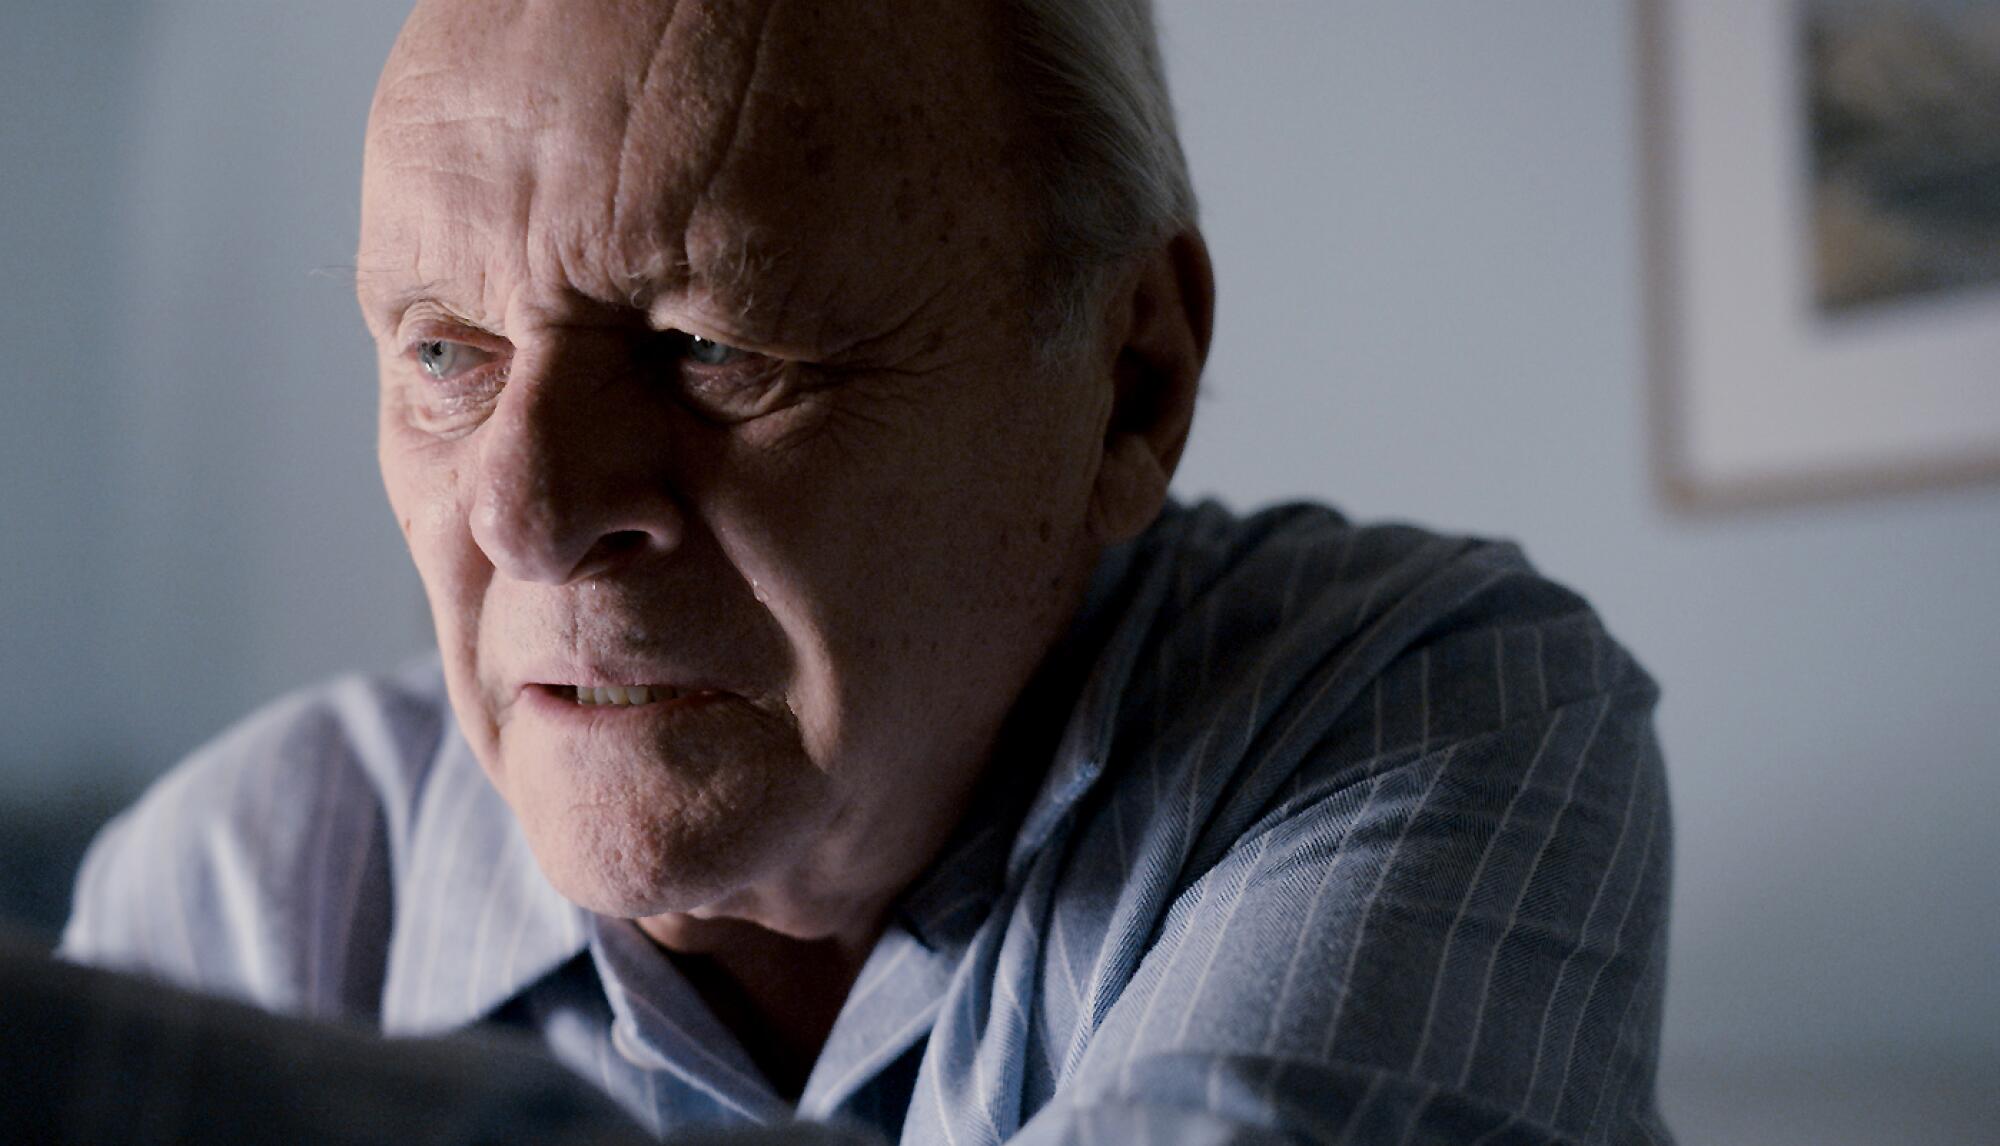 Anthony Hopkins as an elderly man experiencing dementia in "The Father."